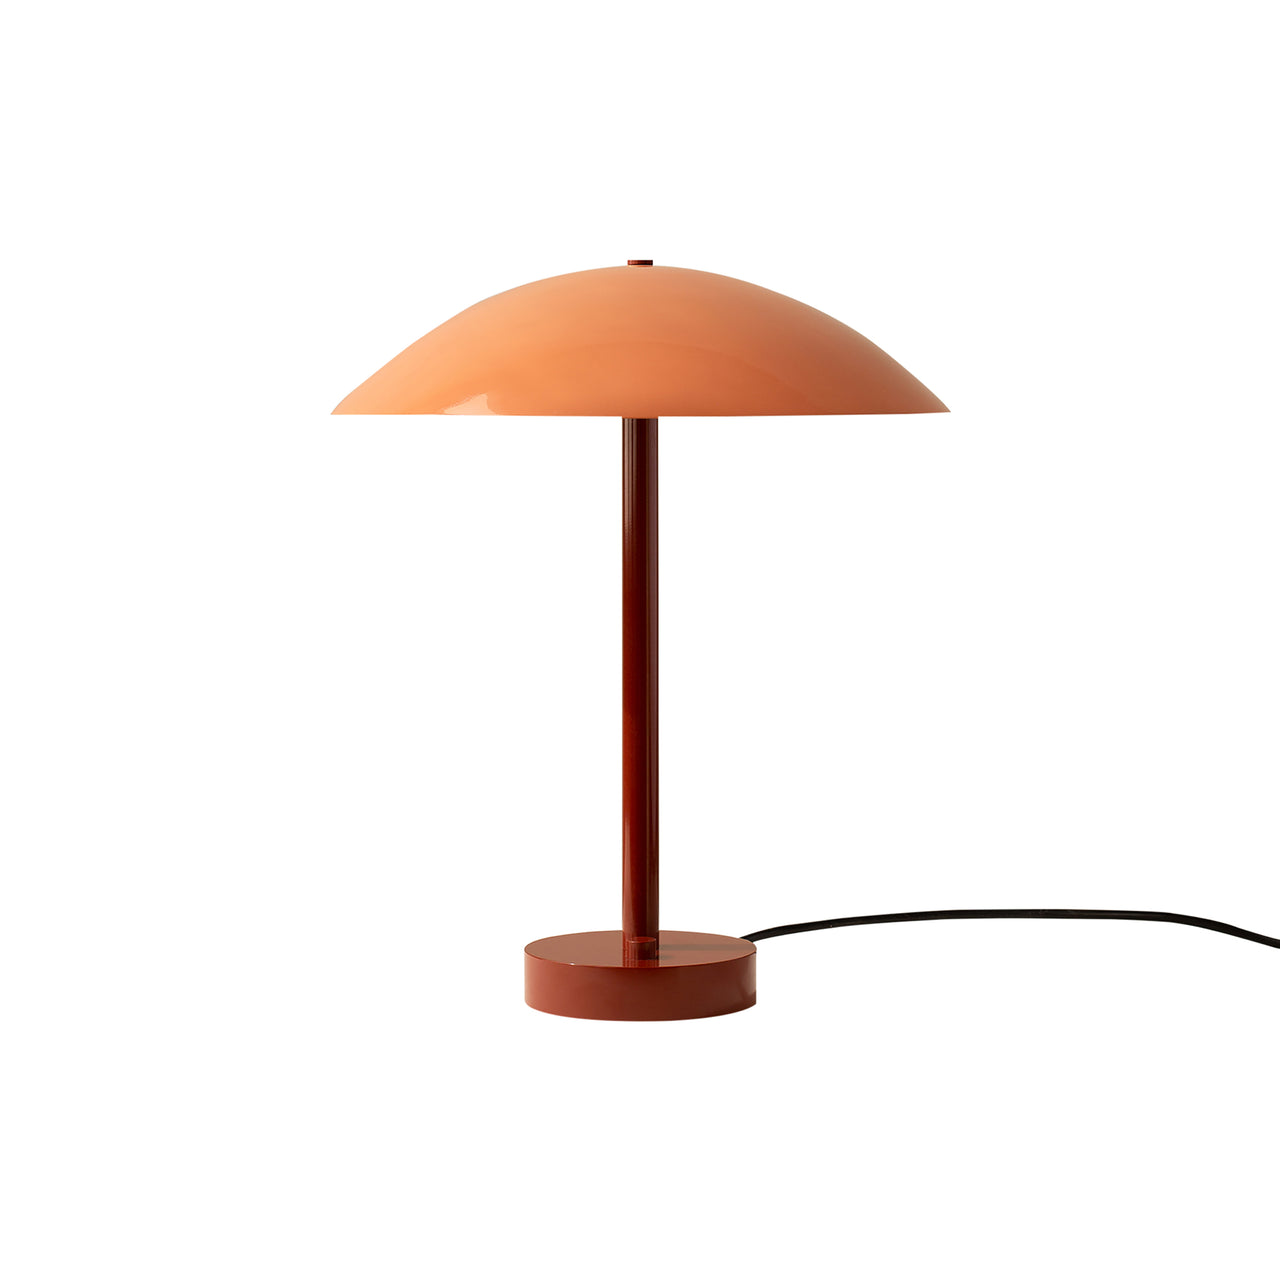 Arundel Table Lamp: Peach + Oxide Red